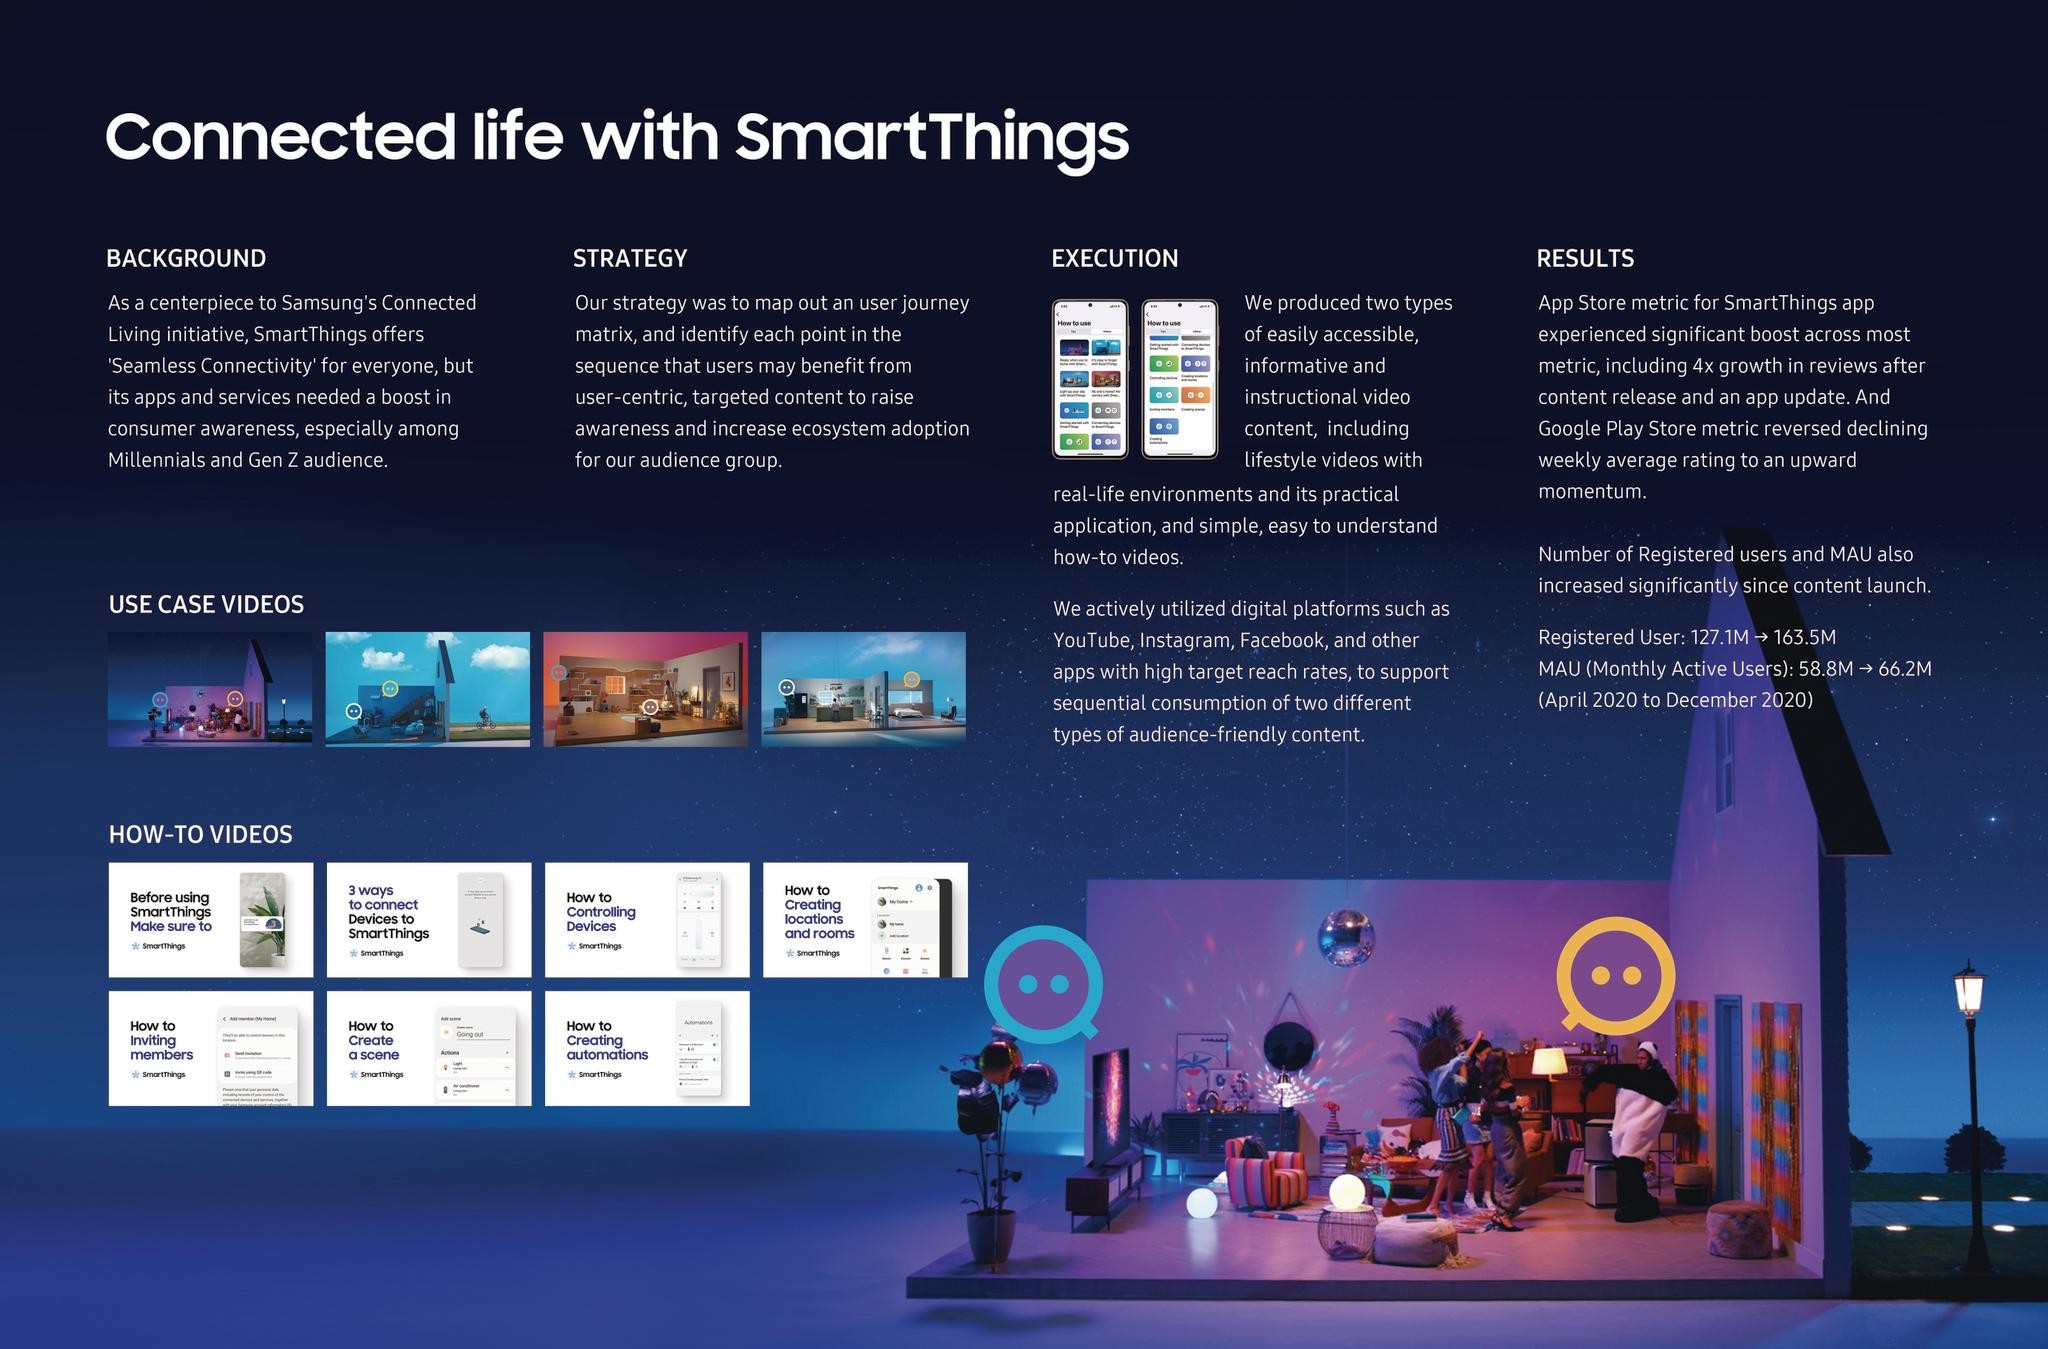 Connected life with SmartThings